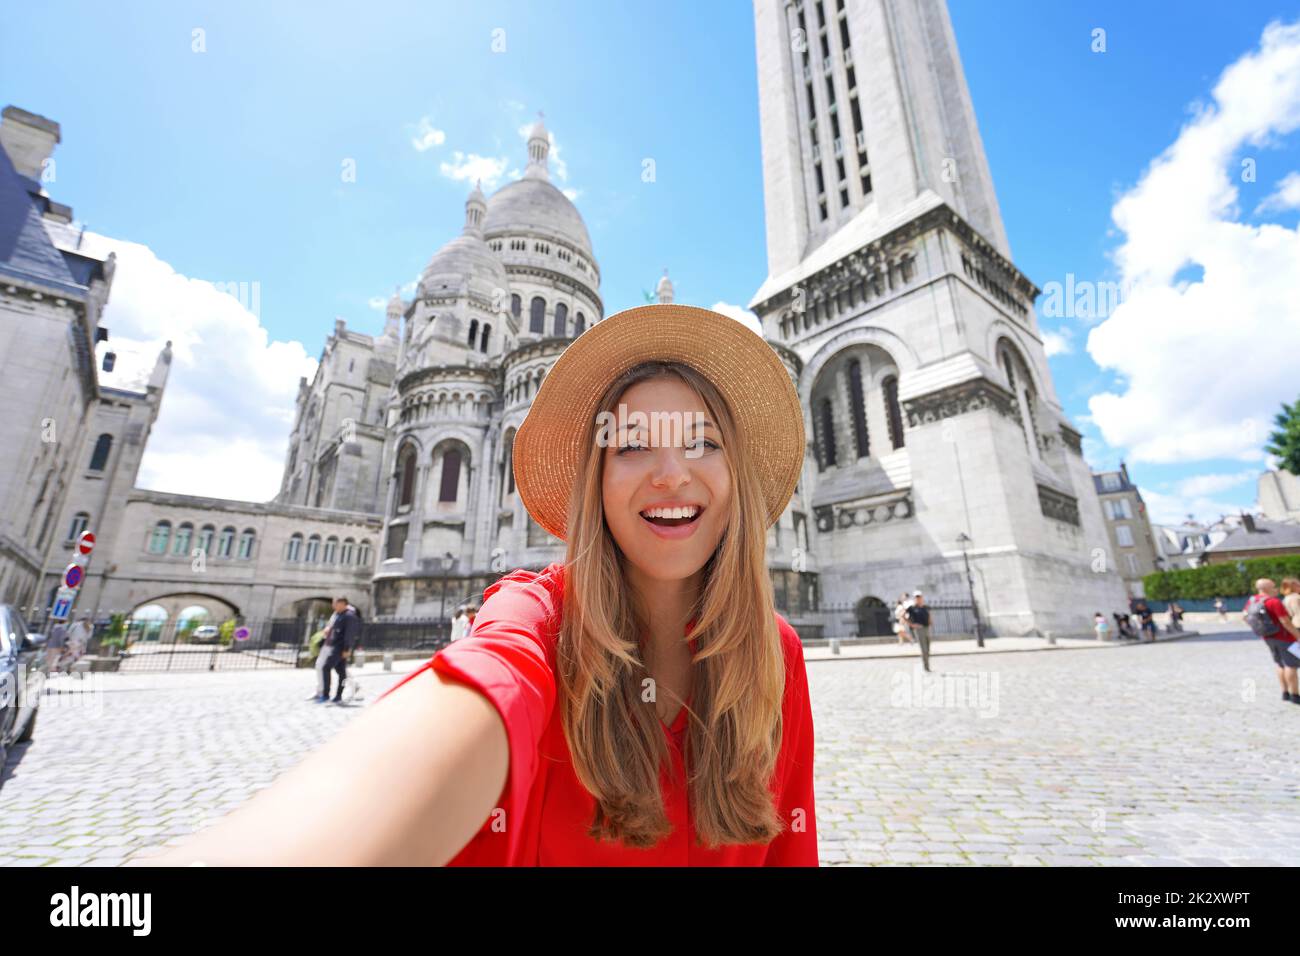 Selfie girl in Paris with the Basilica of the Sacred Heart of Paris on the background. Smiling at camera. Low angle. Stock Photo